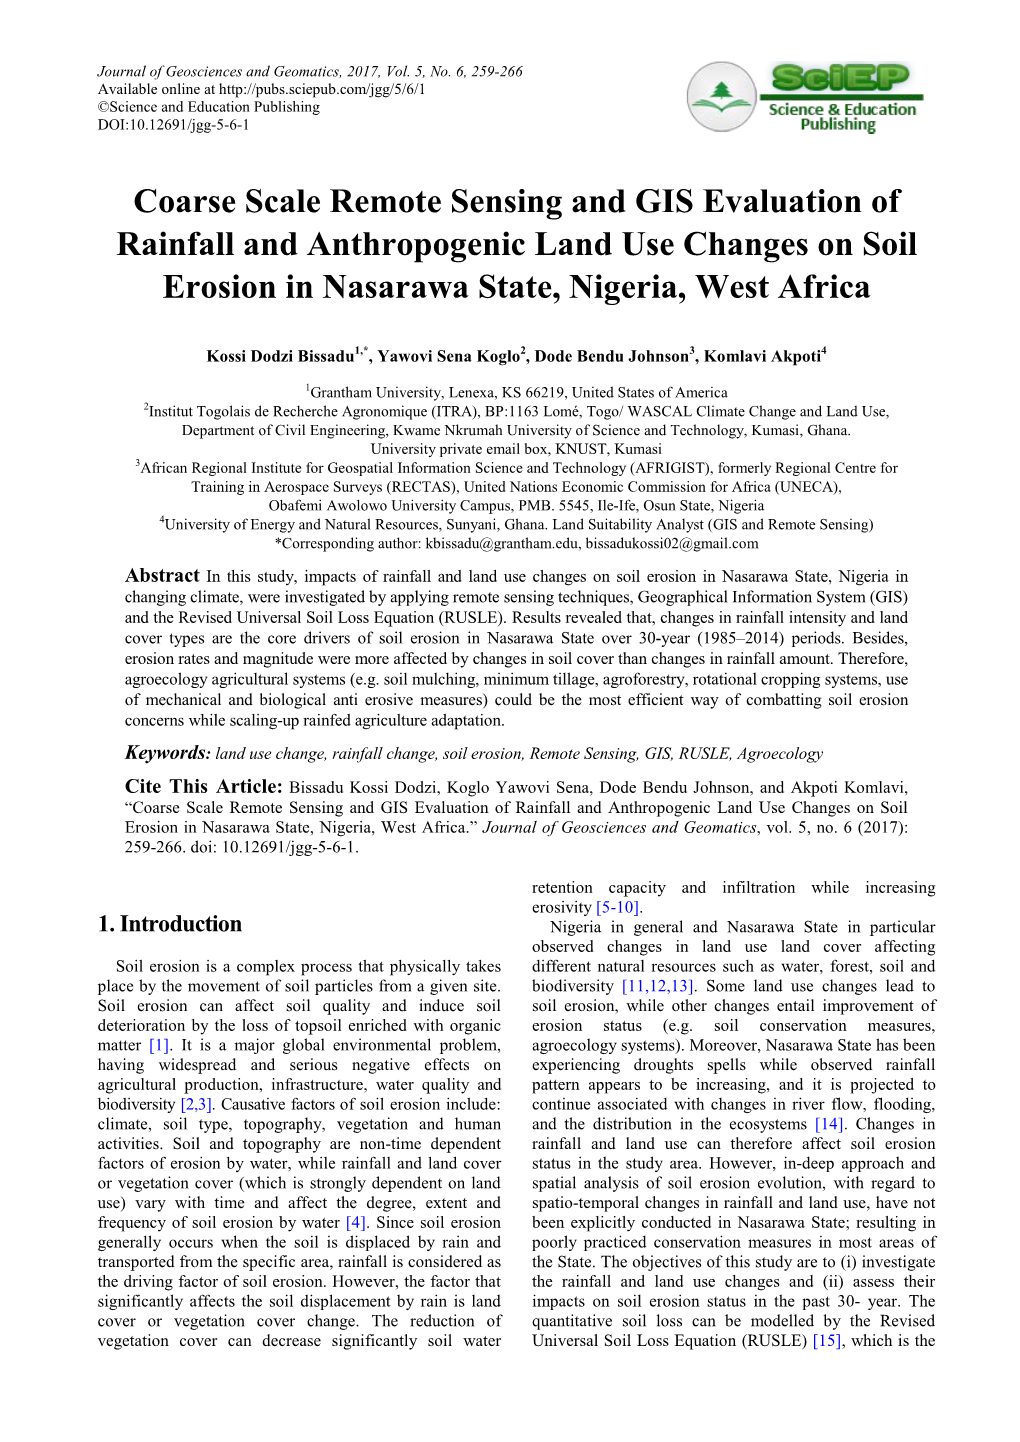 Coarse Scale Remote Sensing and GIS Evaluation of Rainfall and Anthropogenic Land Use Changes on Soil Erosion in Nasarawa State, Nigeria, West Africa